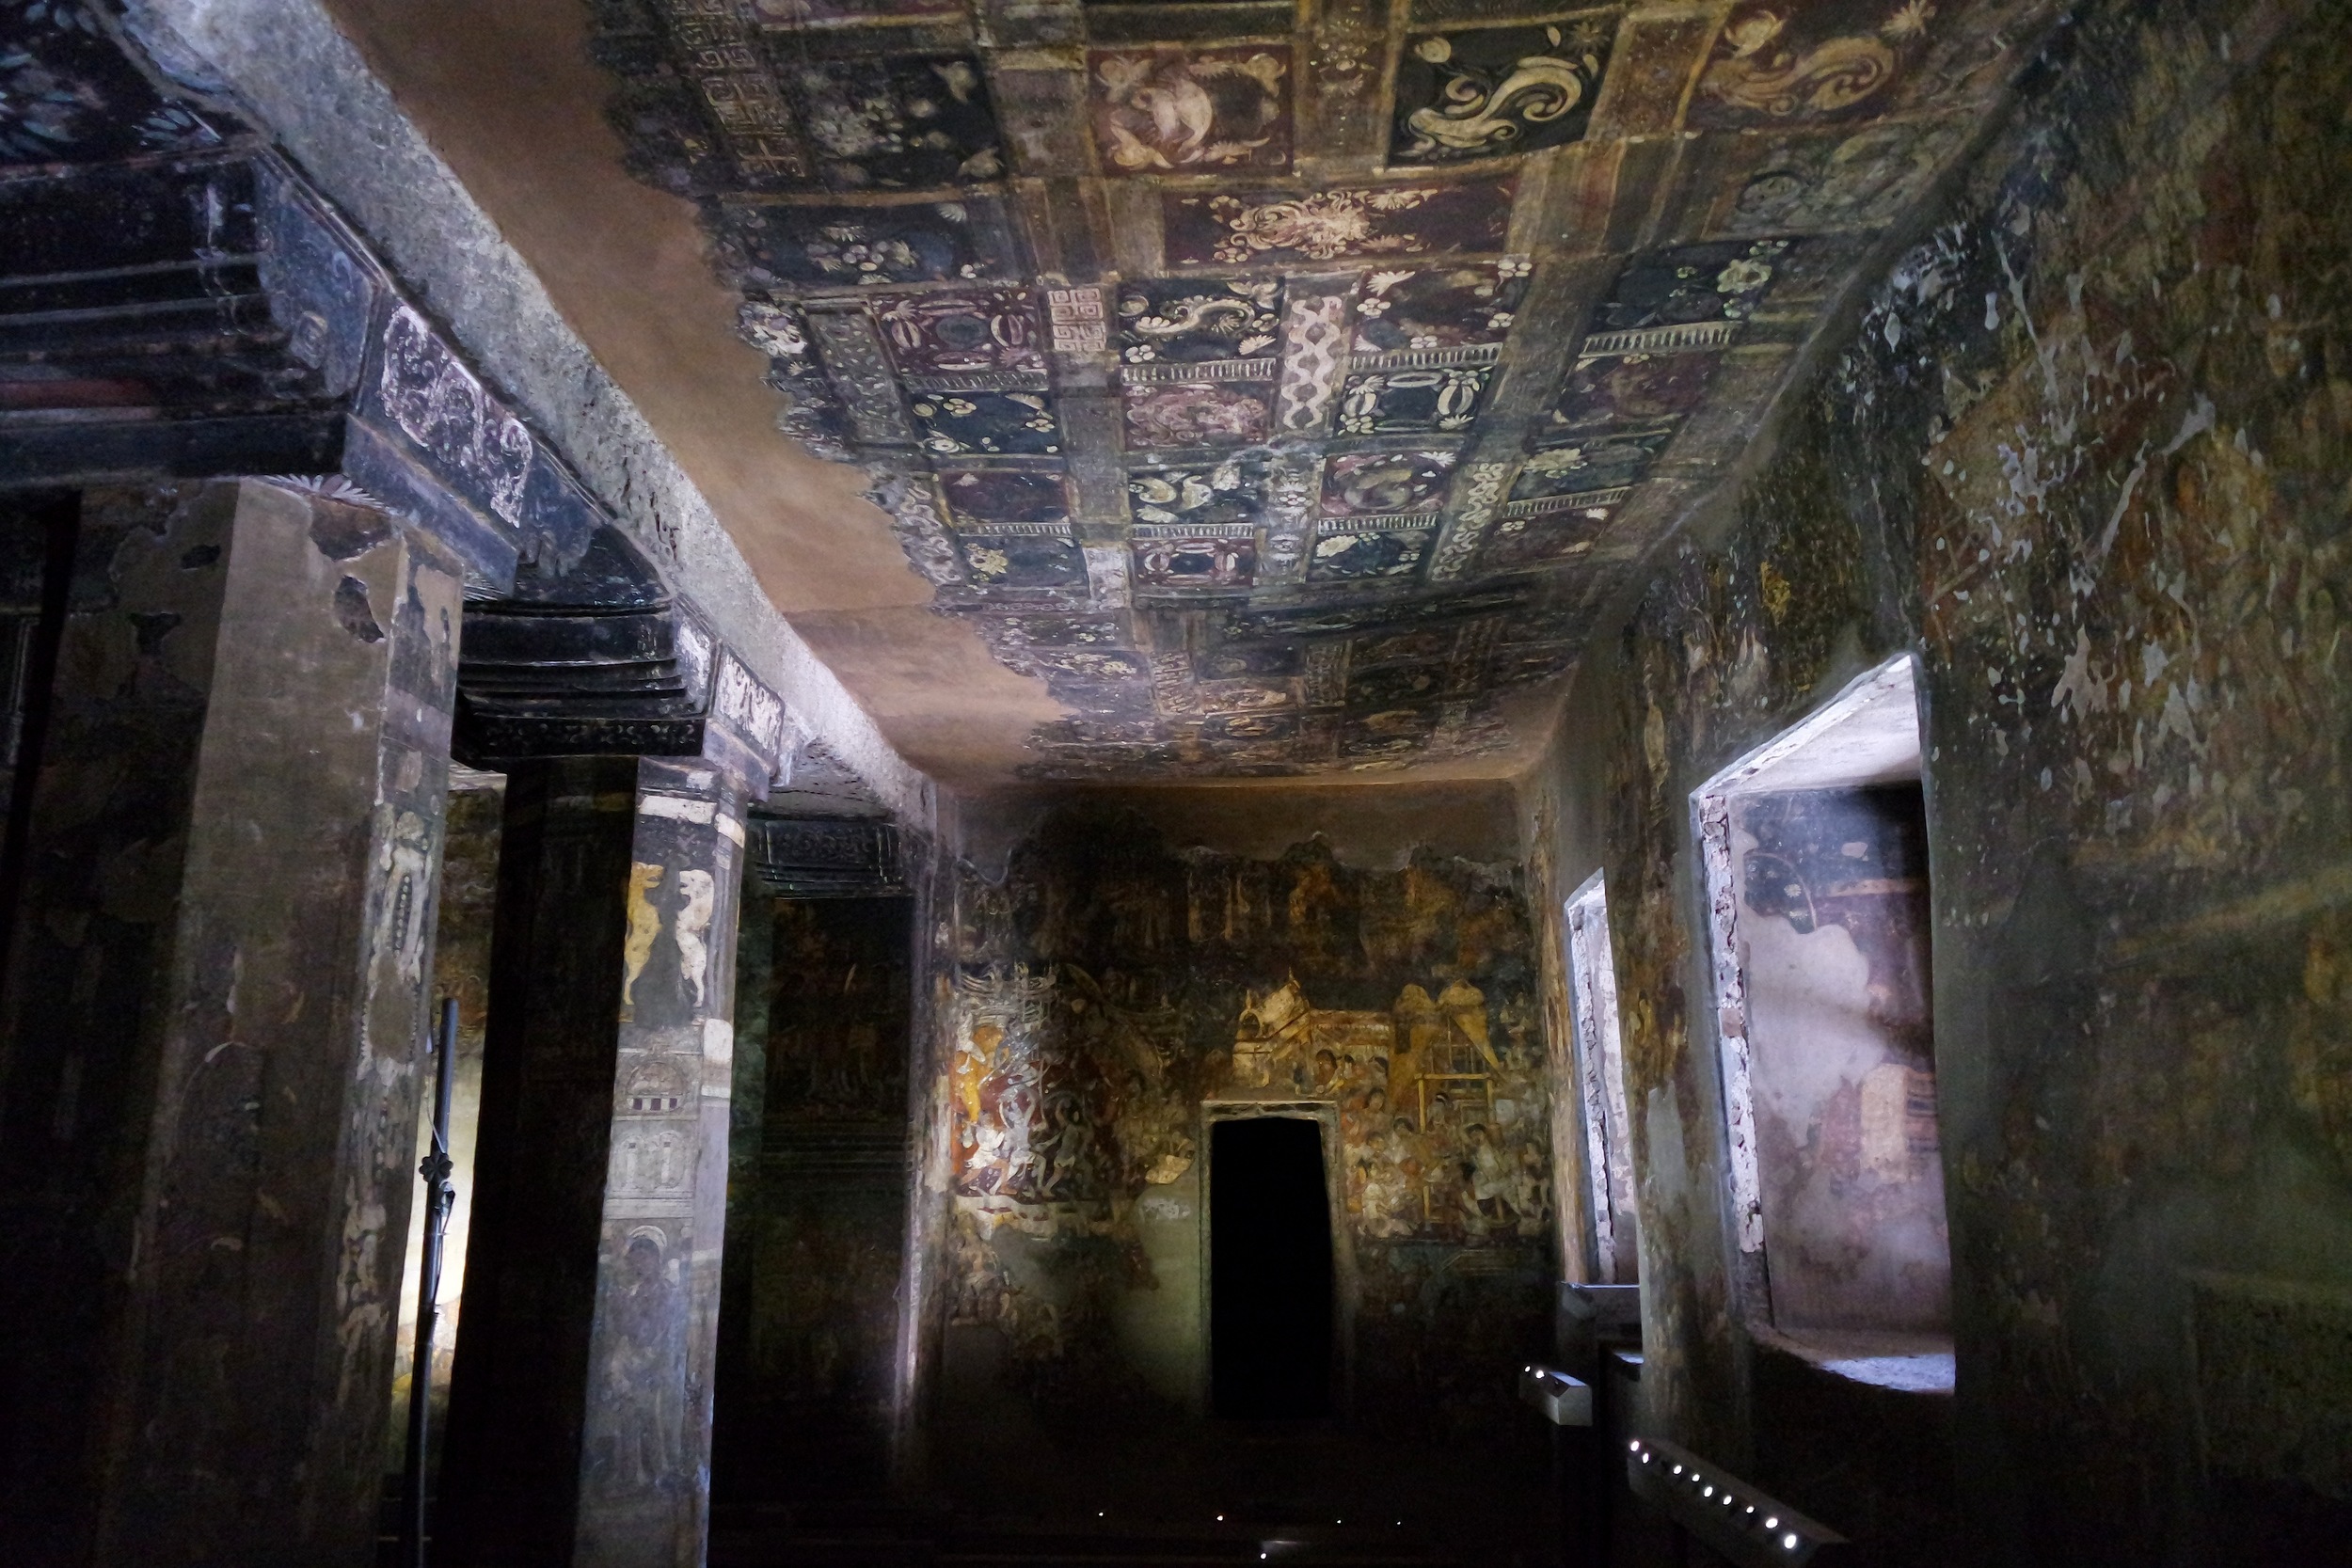  Cave 17: This cave has some of the best-preserved paintings at Ajanta 